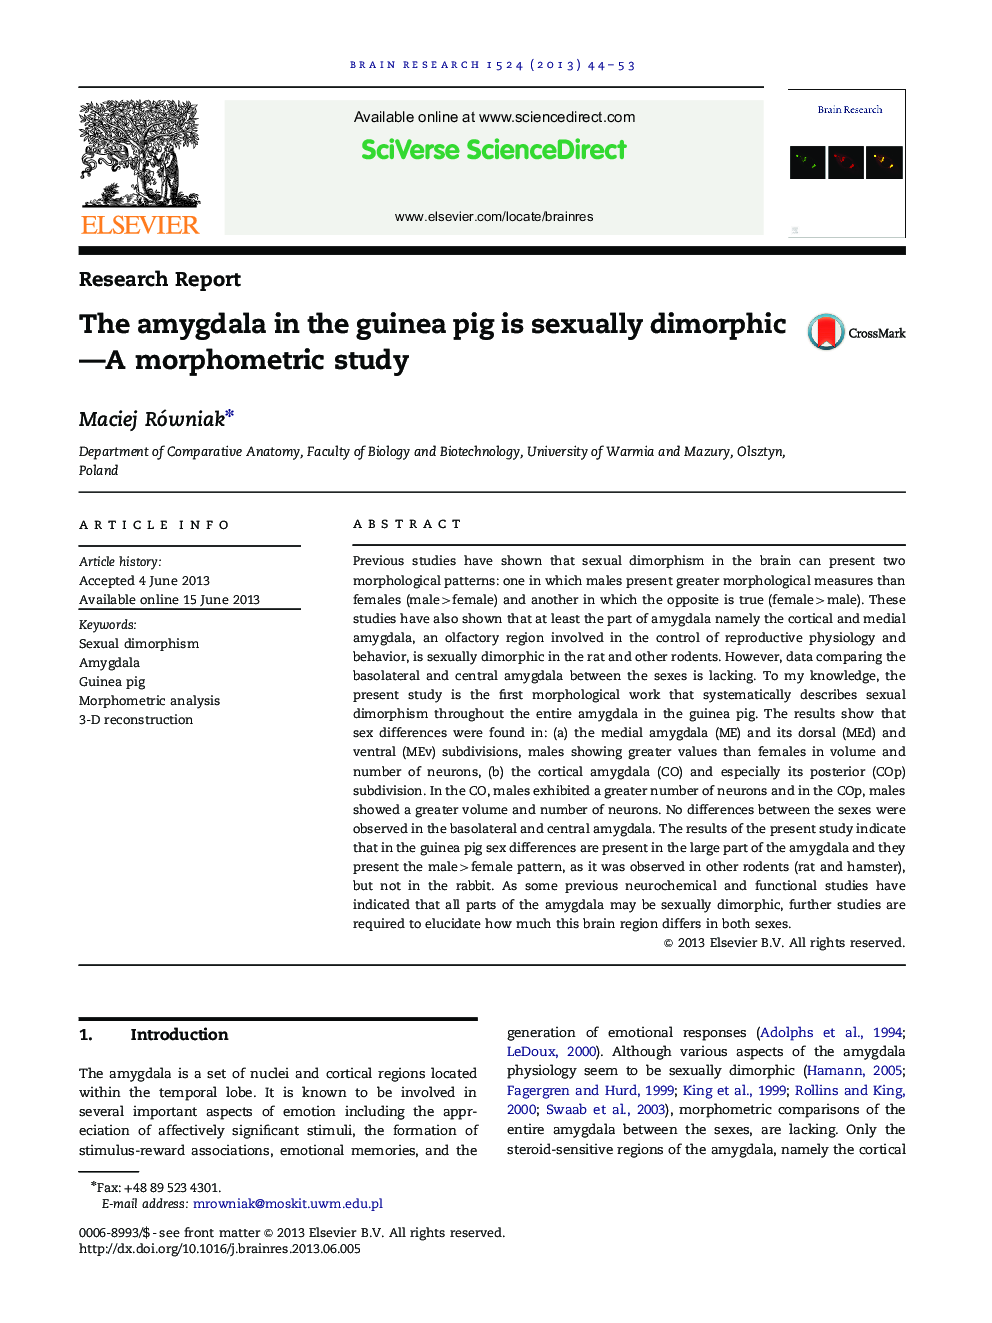 The amygdala in the guinea pig is sexually dimorphic—A morphometric study